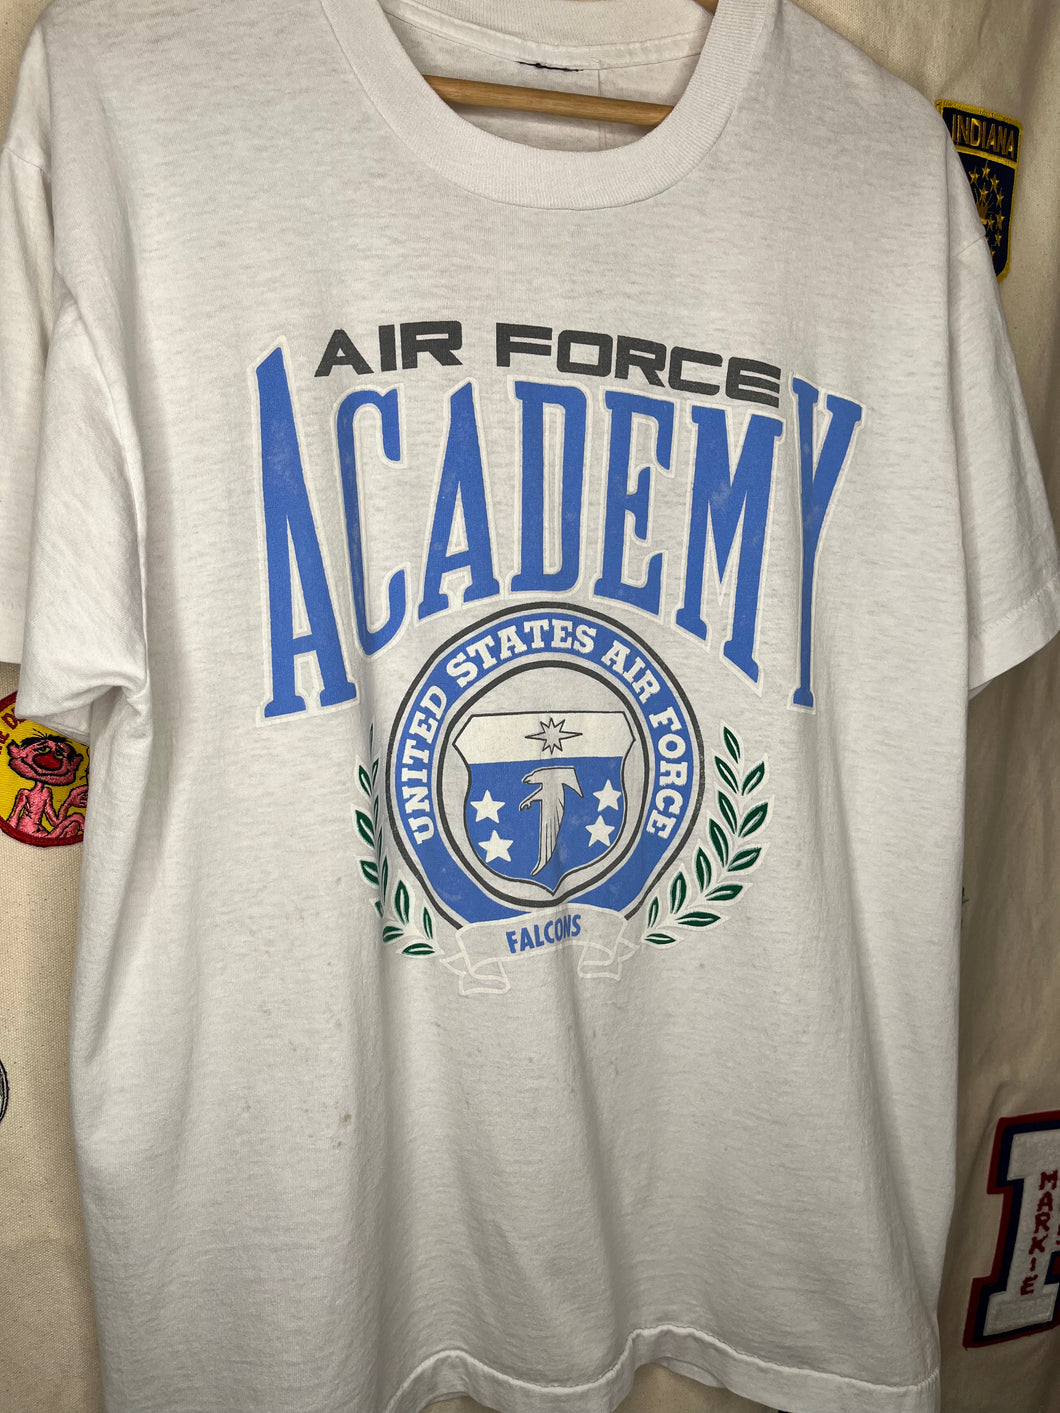 Vintage Air Force Academy T-Shirt: Large